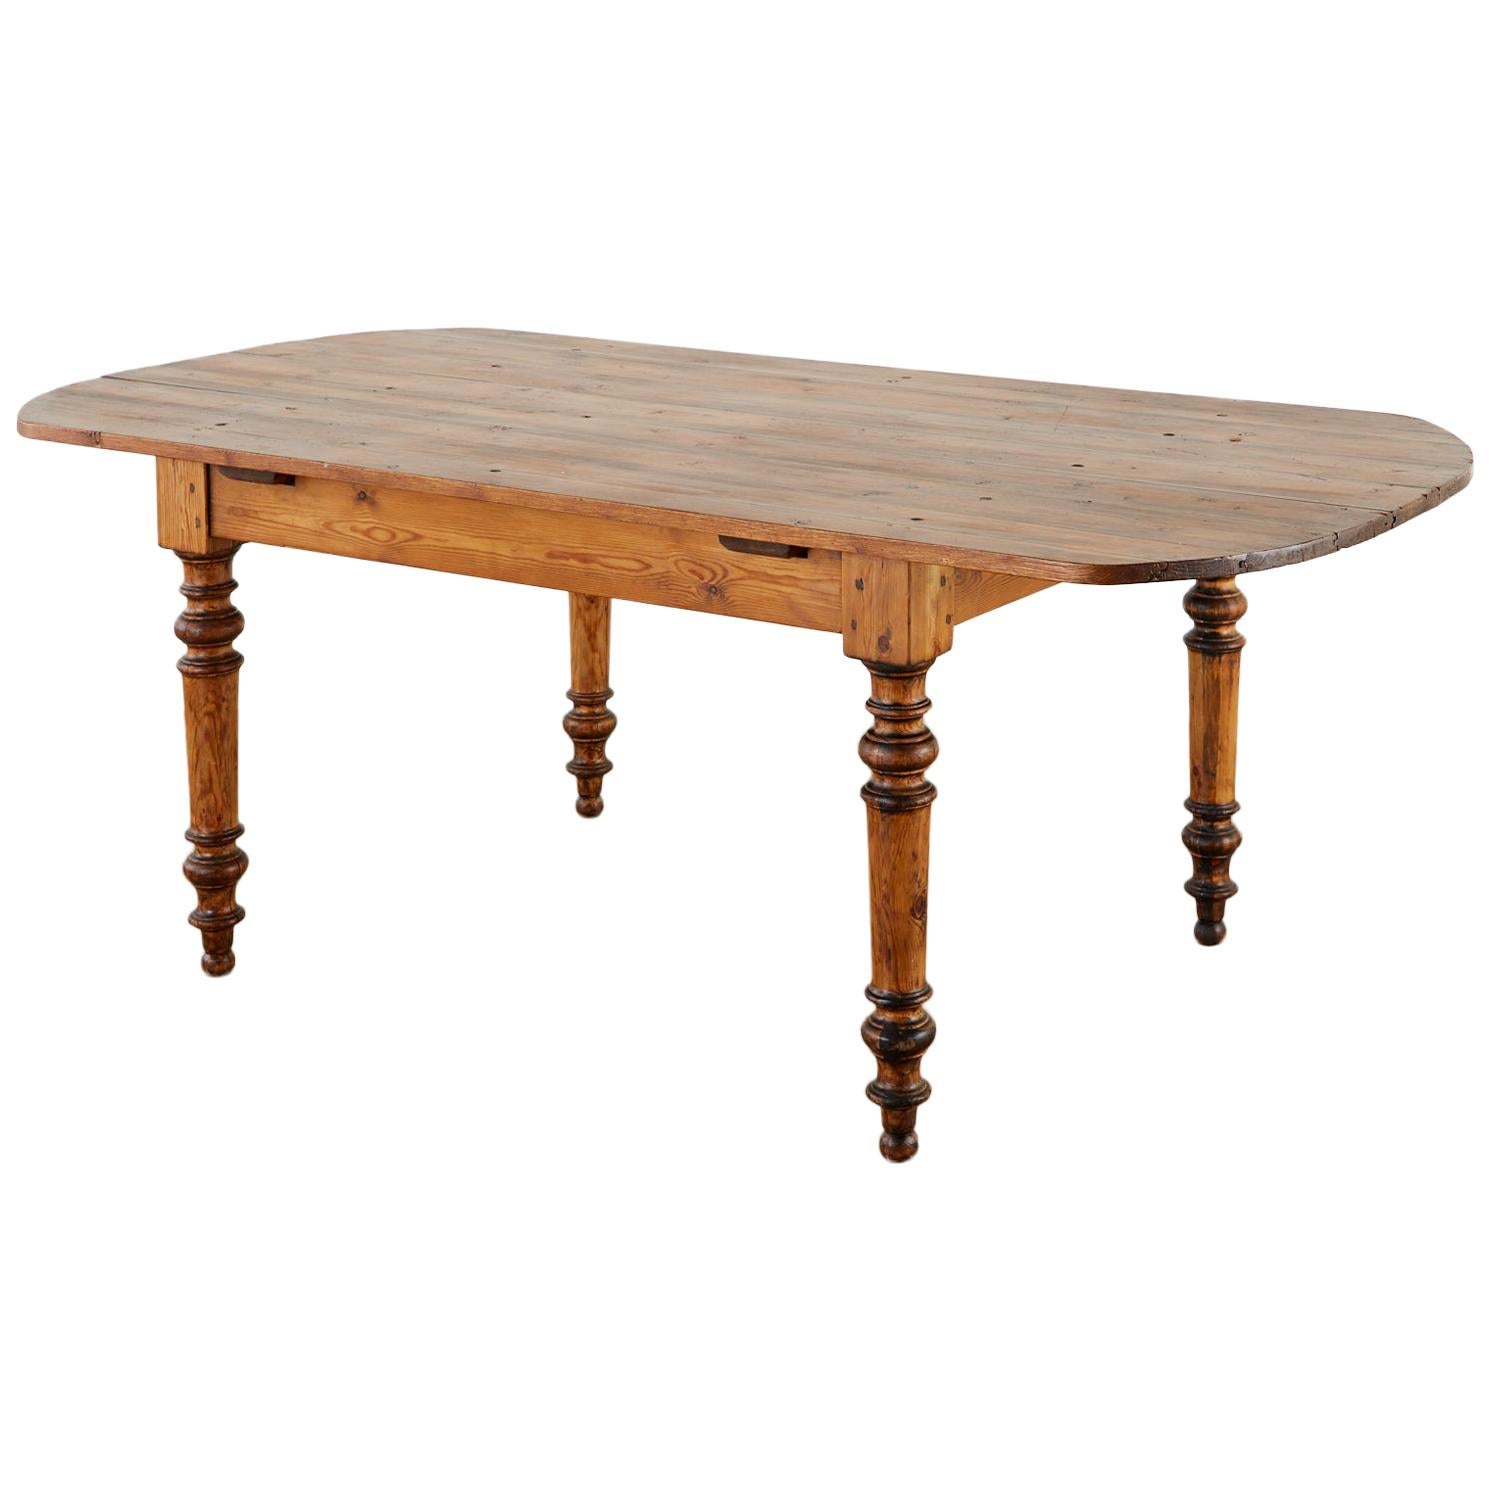 19th Century French Pine Farmhouse Harvest Dining Table